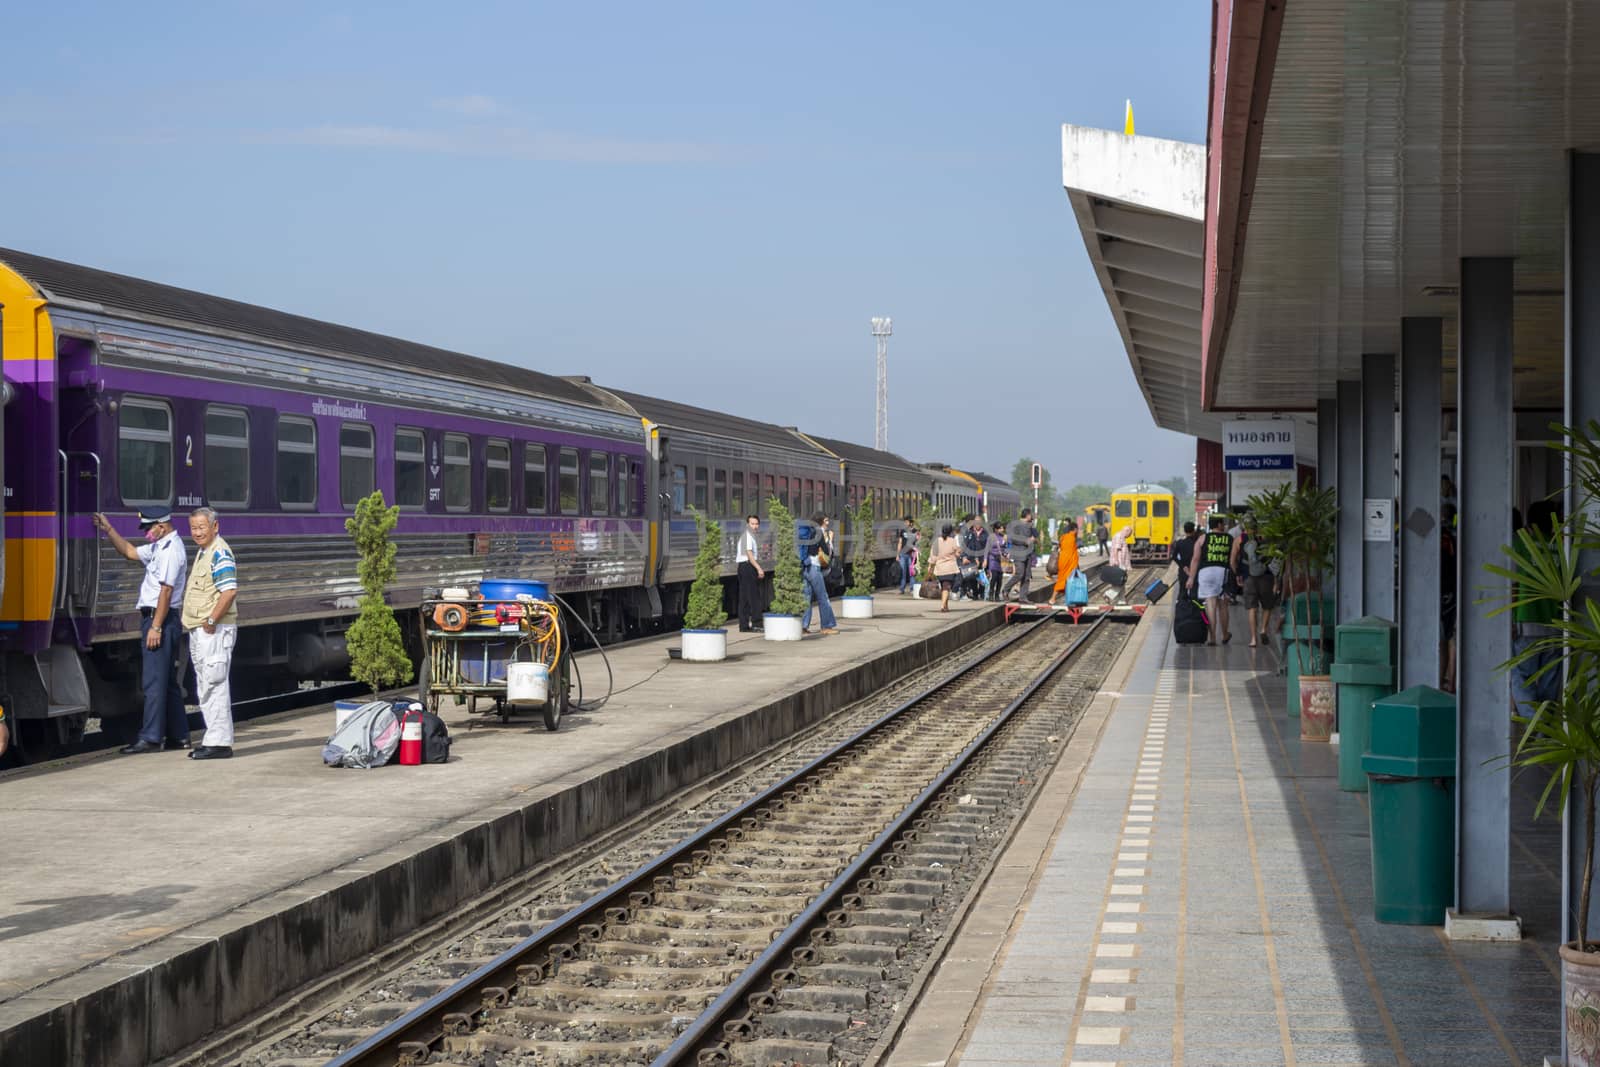 View on the platform of Nong Khai train station in Thailand with people boarding the train by kb79